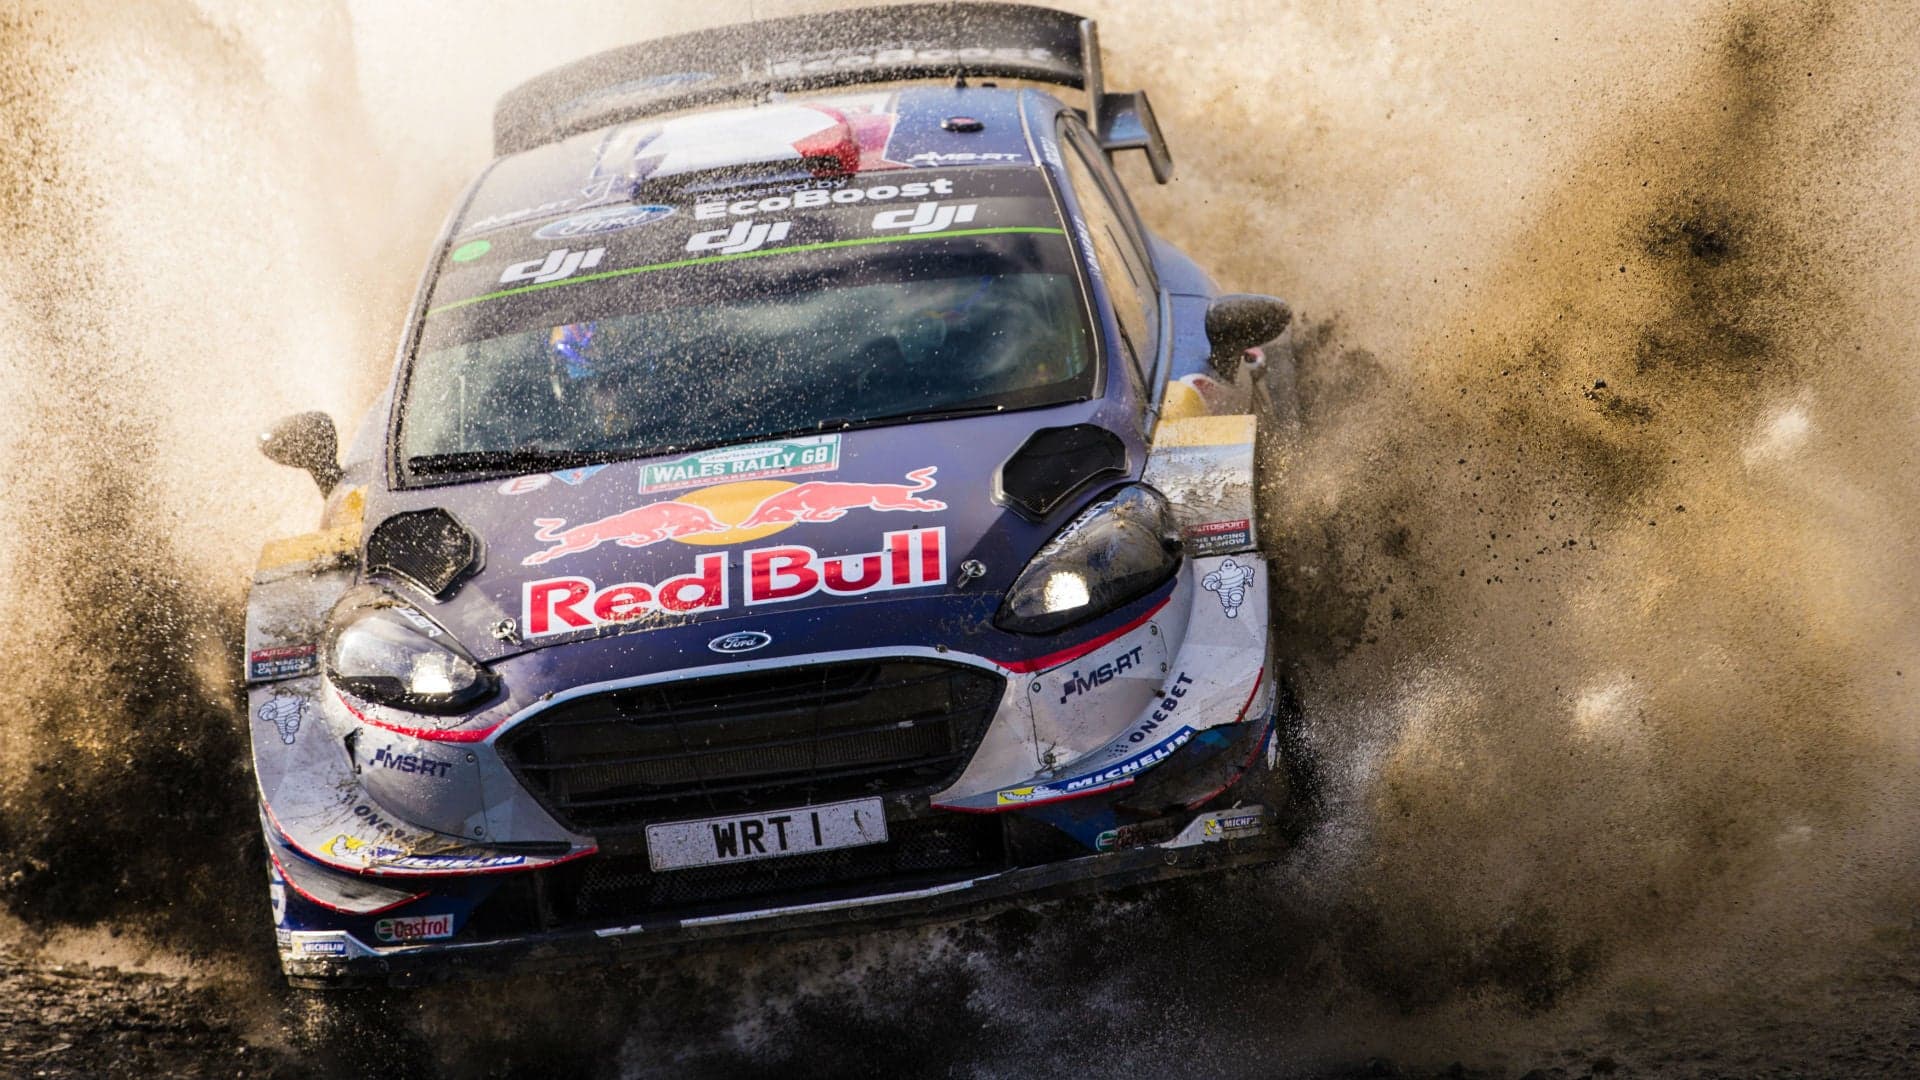 Sebastien Ogier Opts out of Retirement, Will Race With M-Sport WRC in 2018